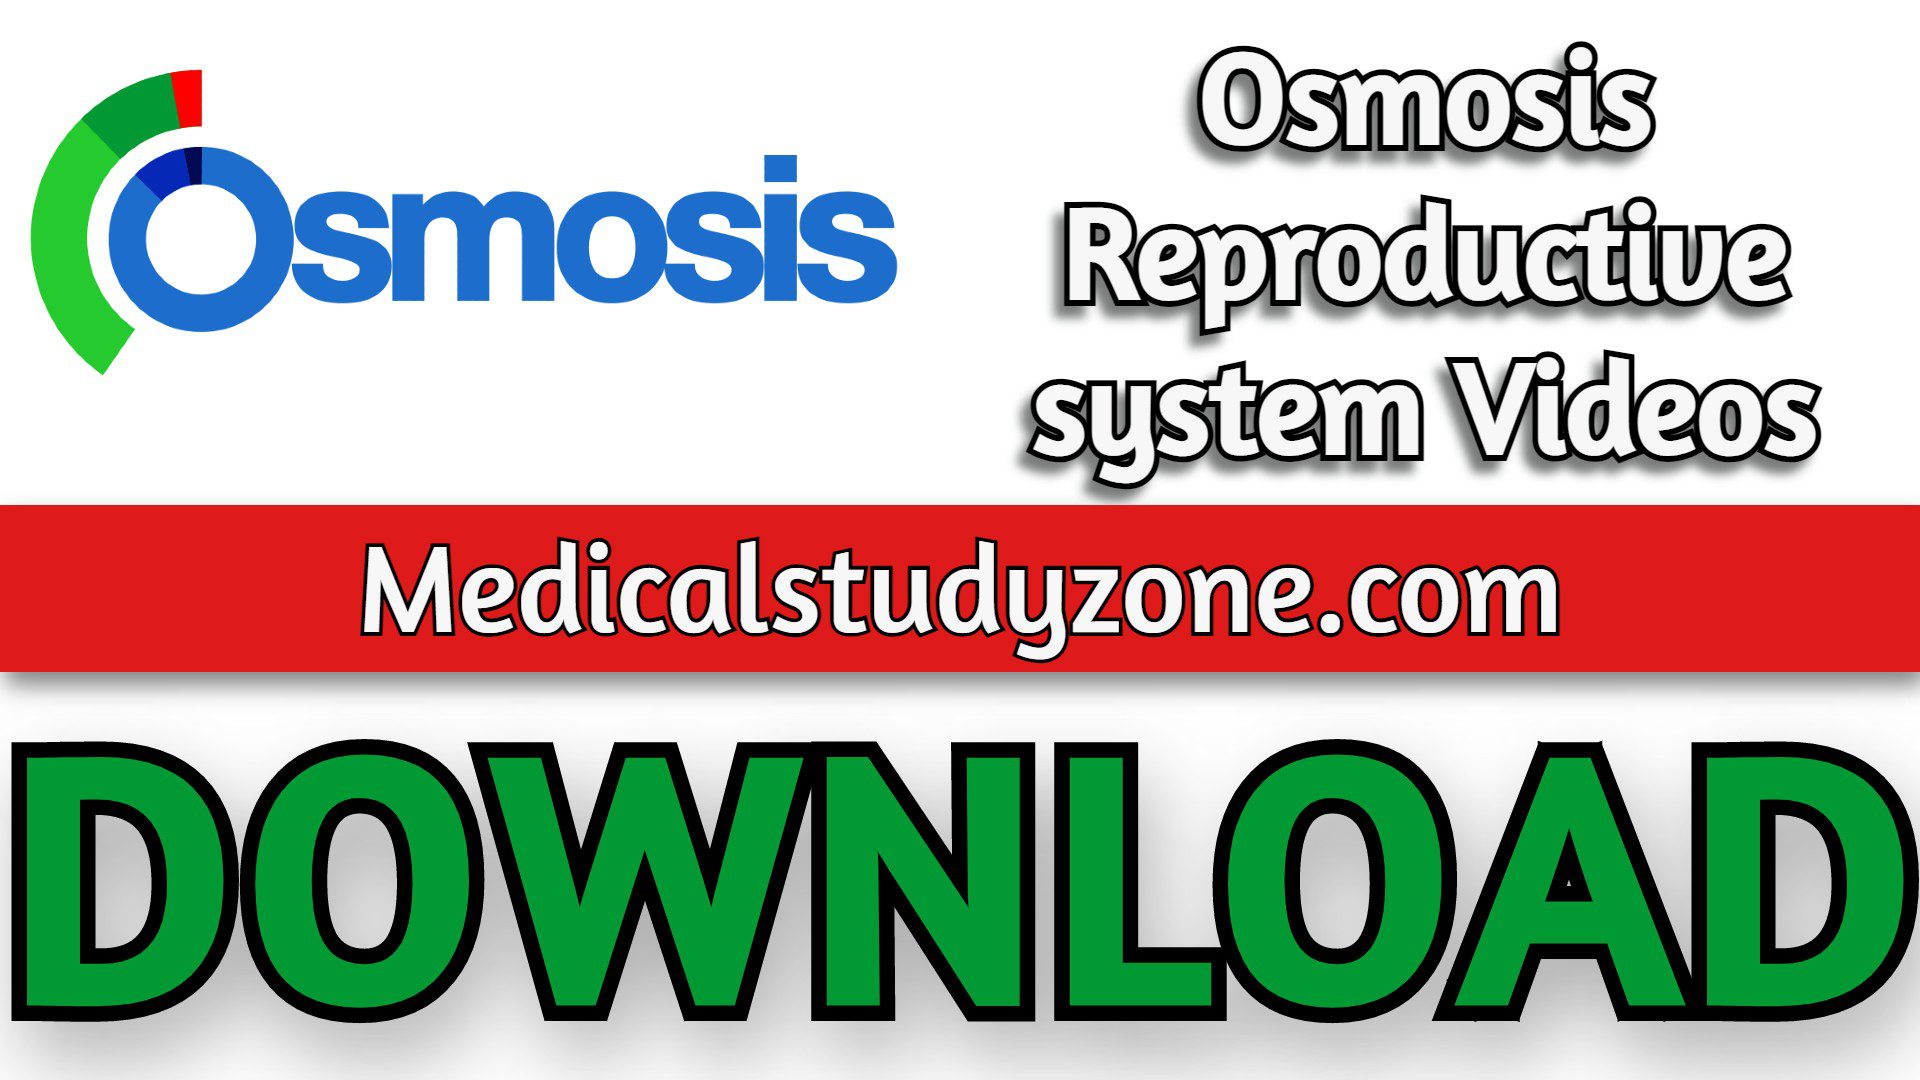 Osmosis Reproductive system Videos 2023 Free Download